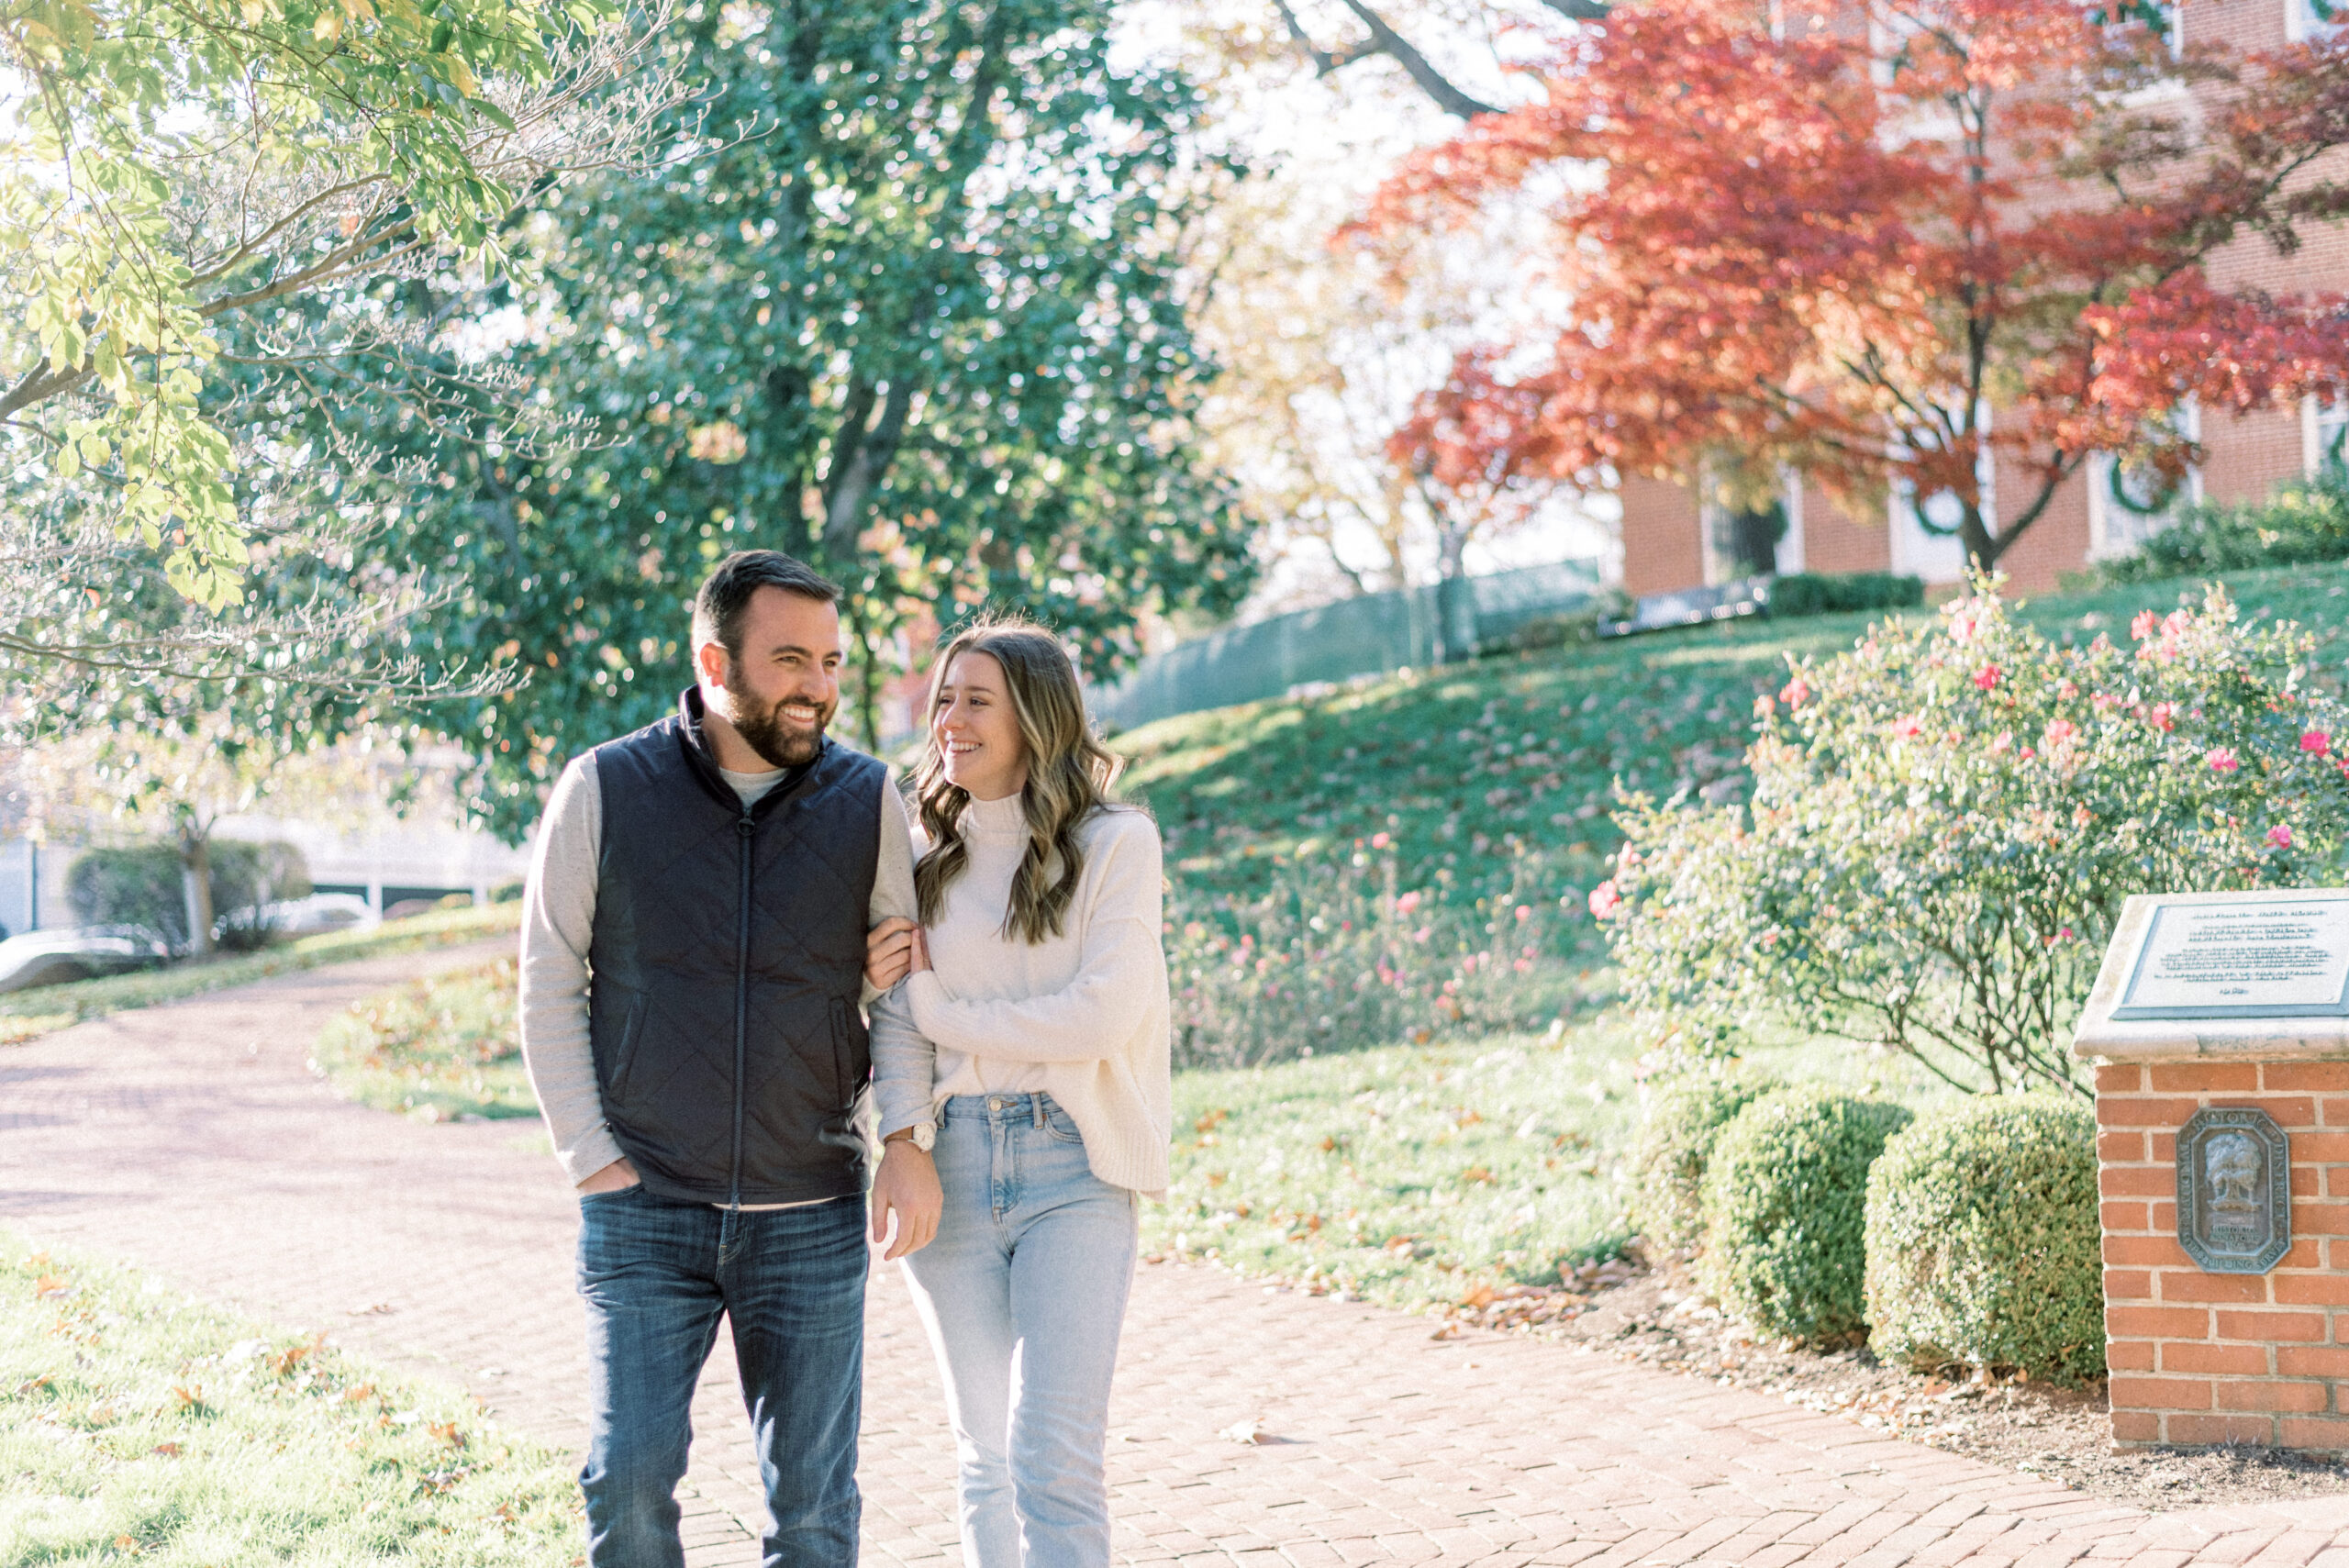 Maryland wedding photographer captures couple walking together in downtown Annapolis fall weather